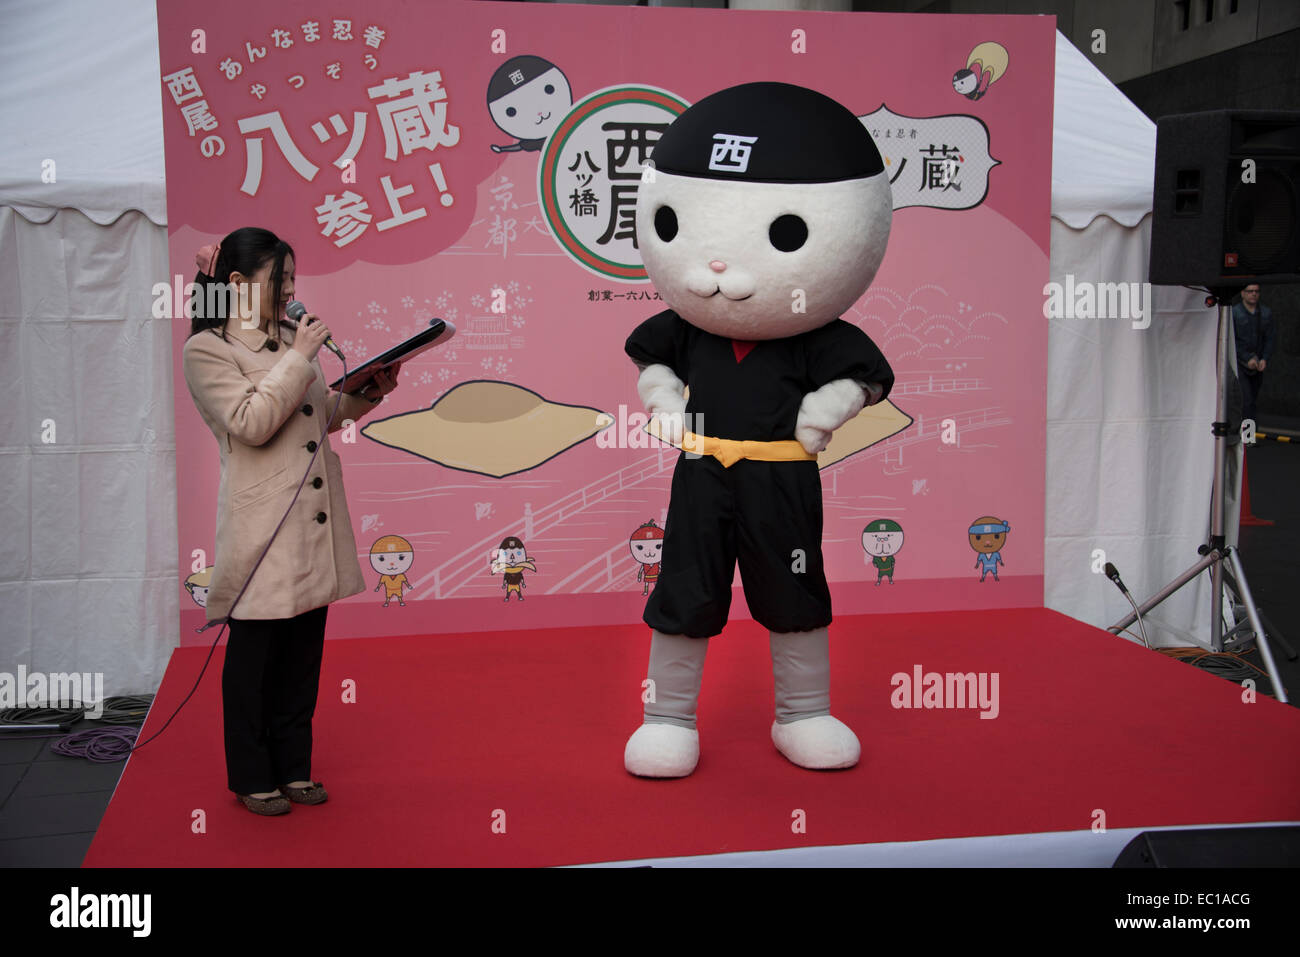 A mascot taking part in Japanese TV show at Kyoto station, Japan. Stock Photo